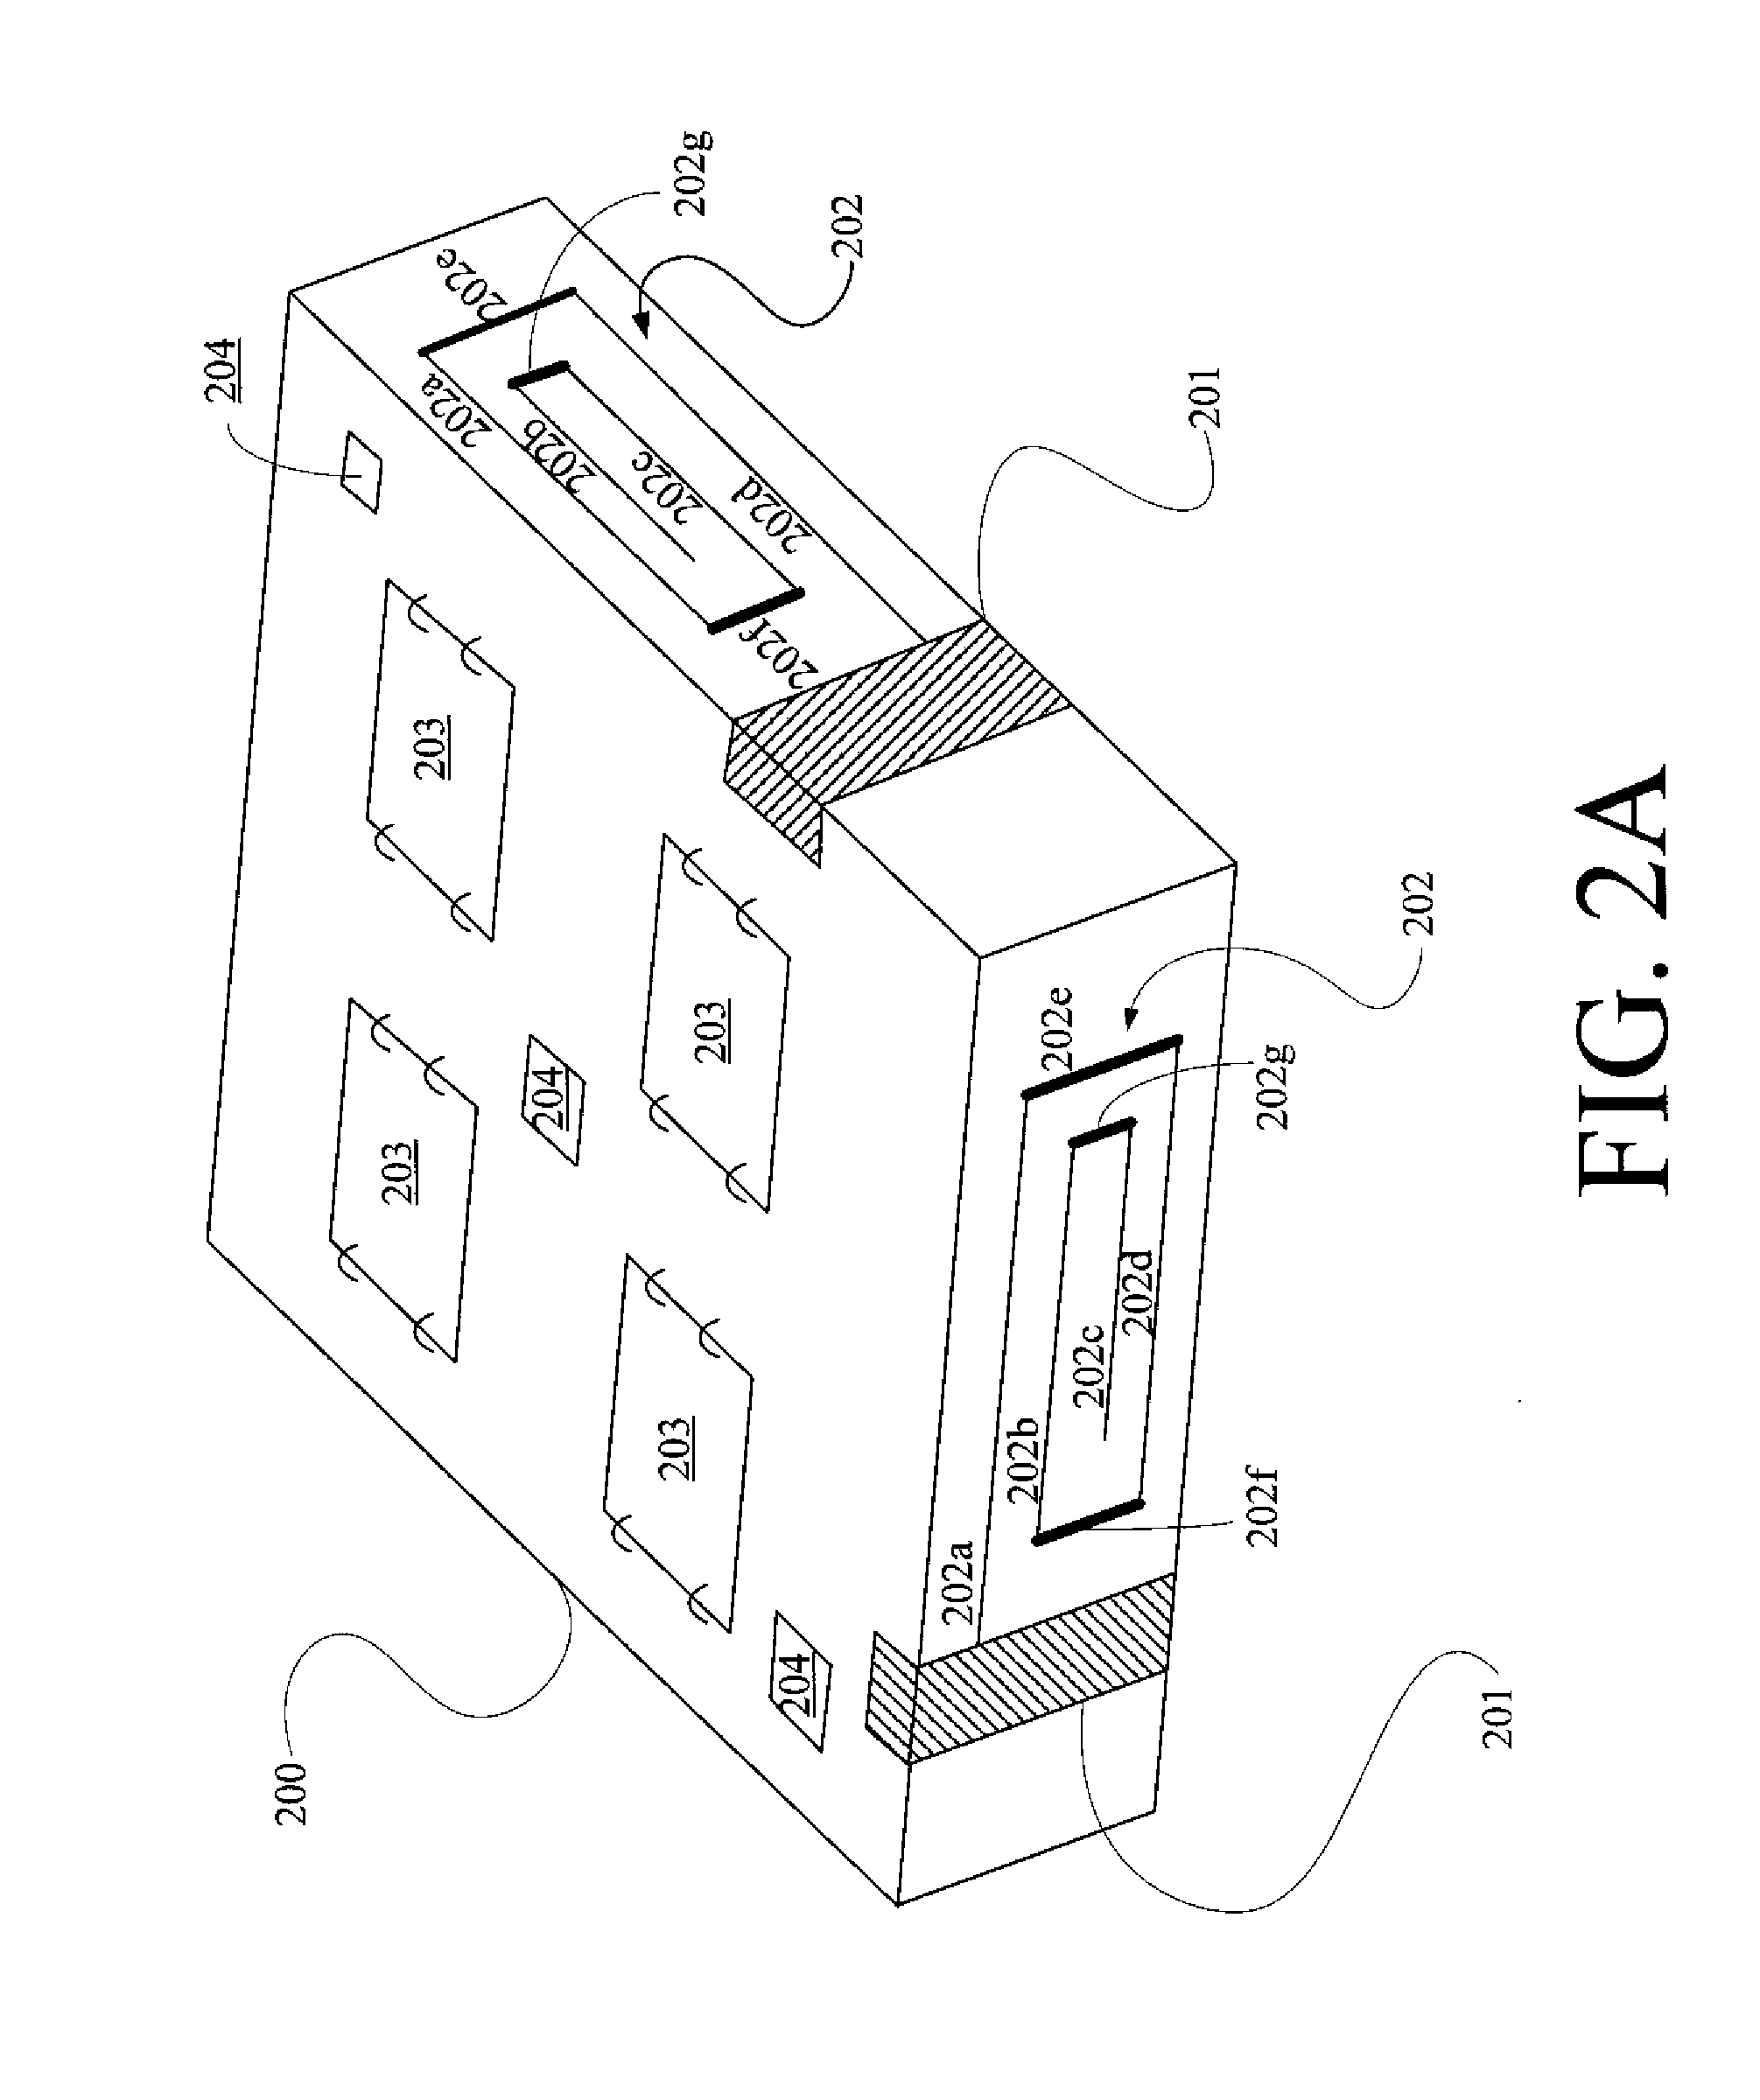 Systems and Methods for Integrated Antennae Structures in Multilayer Organic-Based Printed Circuit Devices